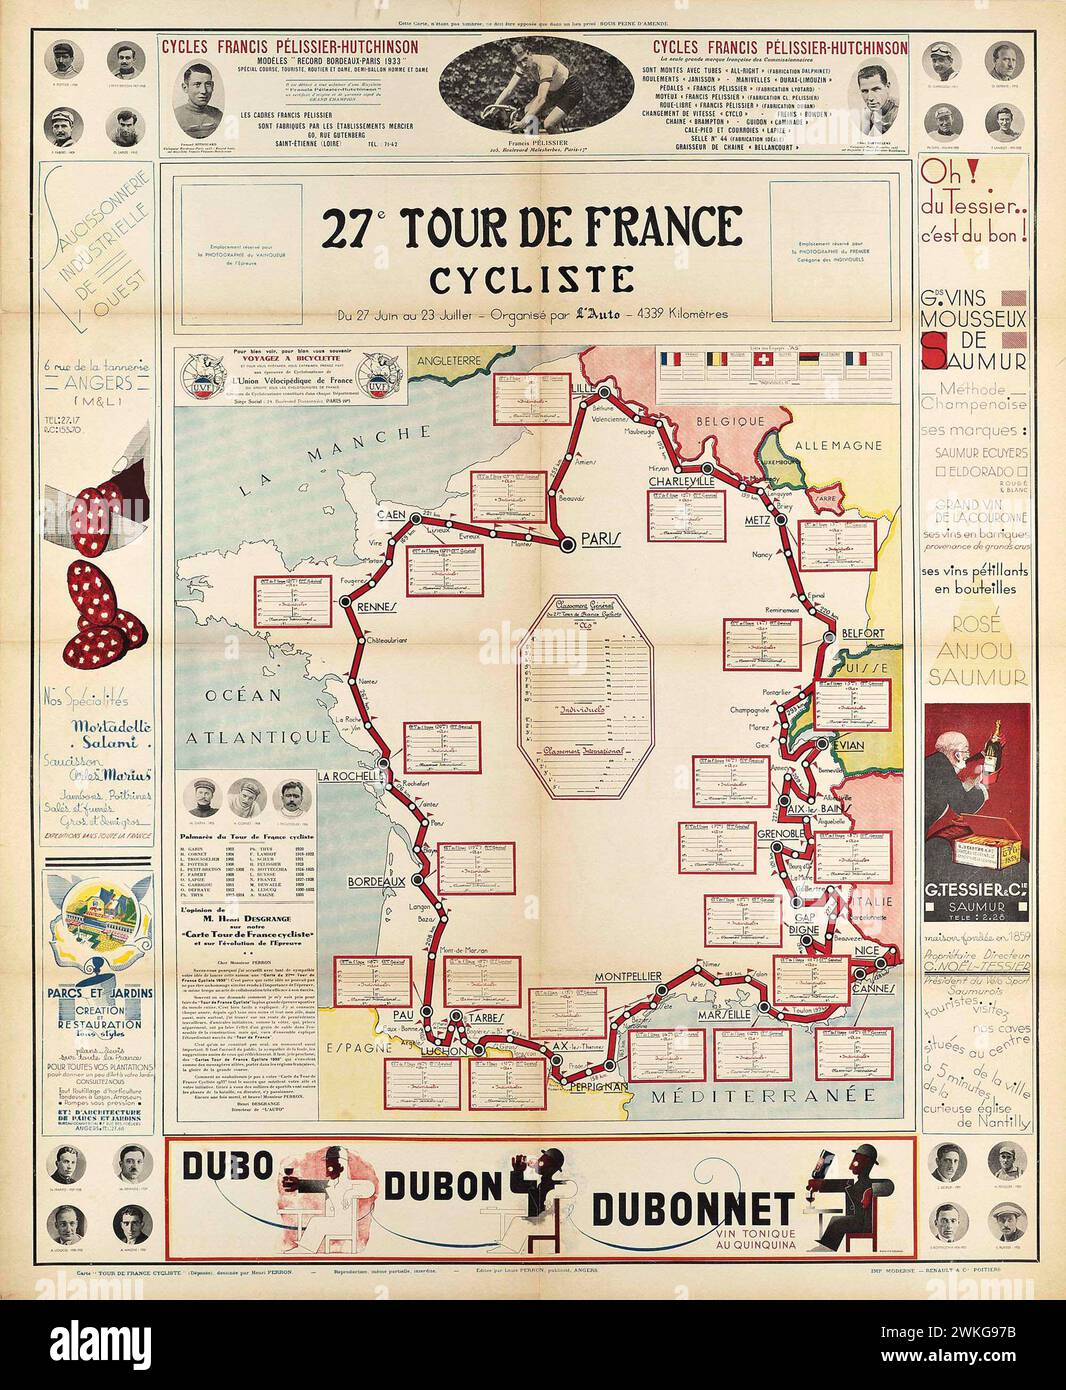 Vintage Travel Poster for the 27th Tour de France. With Maps and advertising. 1930s Stock Photo